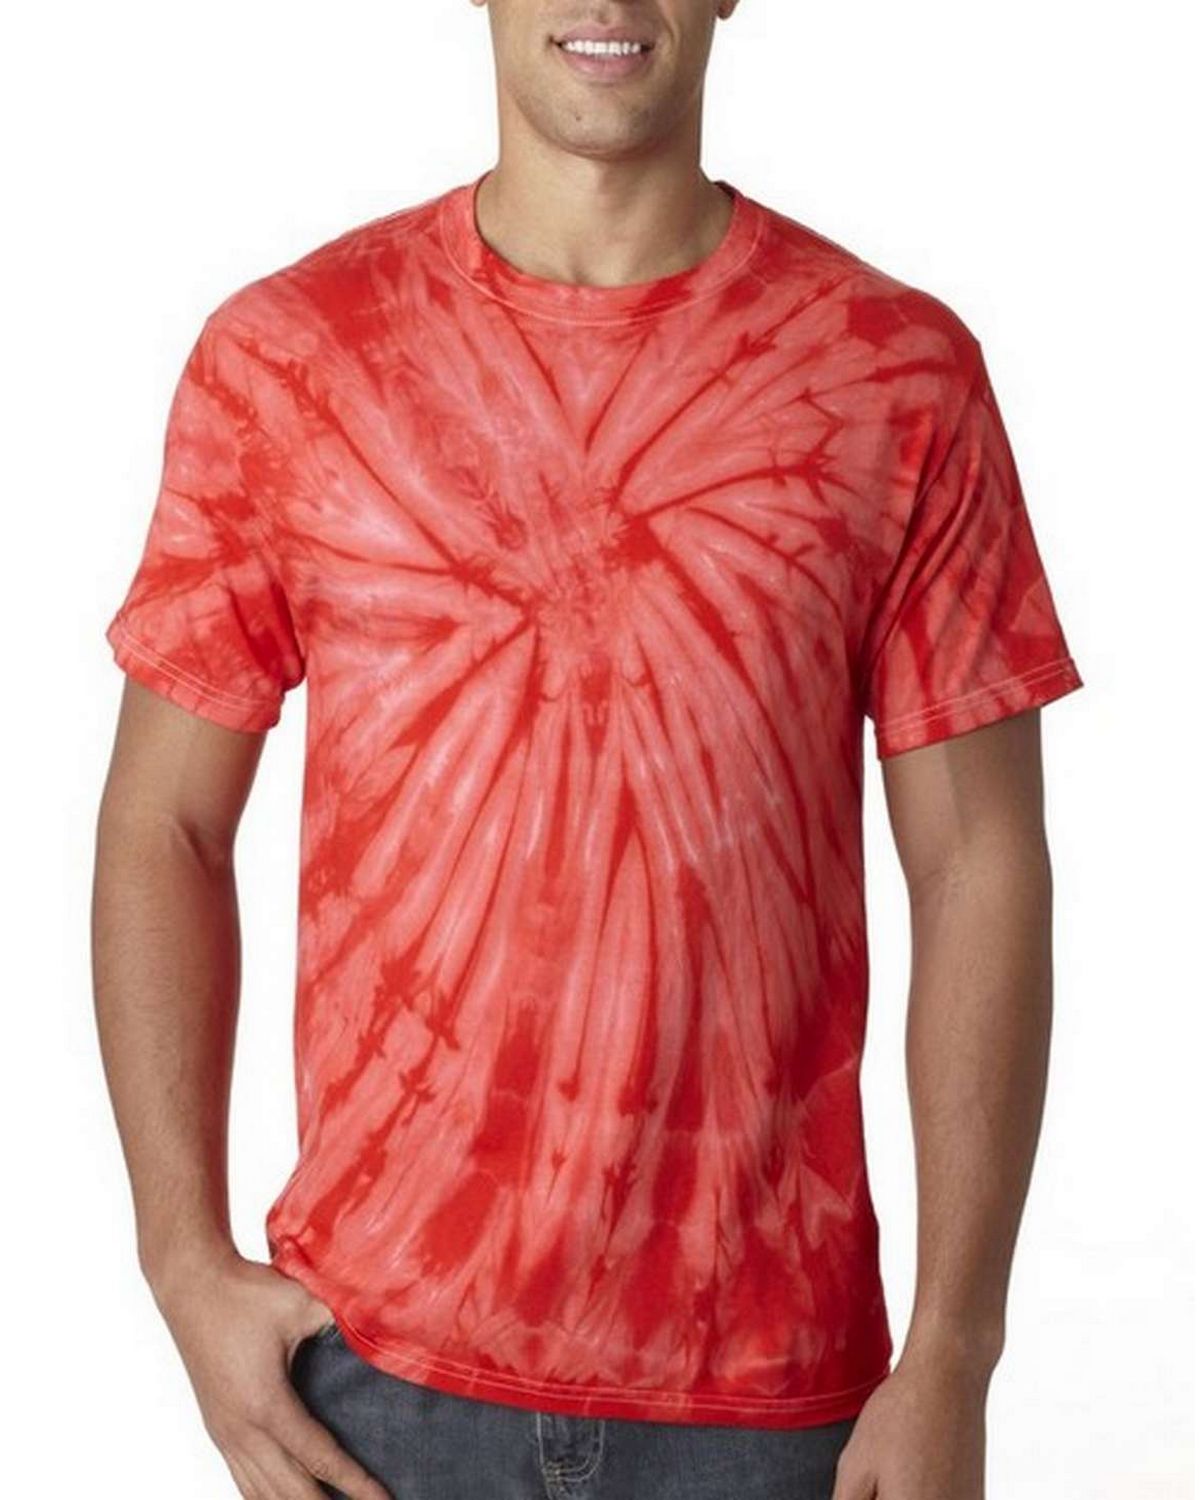 Tie-Dye HS1000 Adult Spider Cotton Tee - Shop at ApparelnBags.com